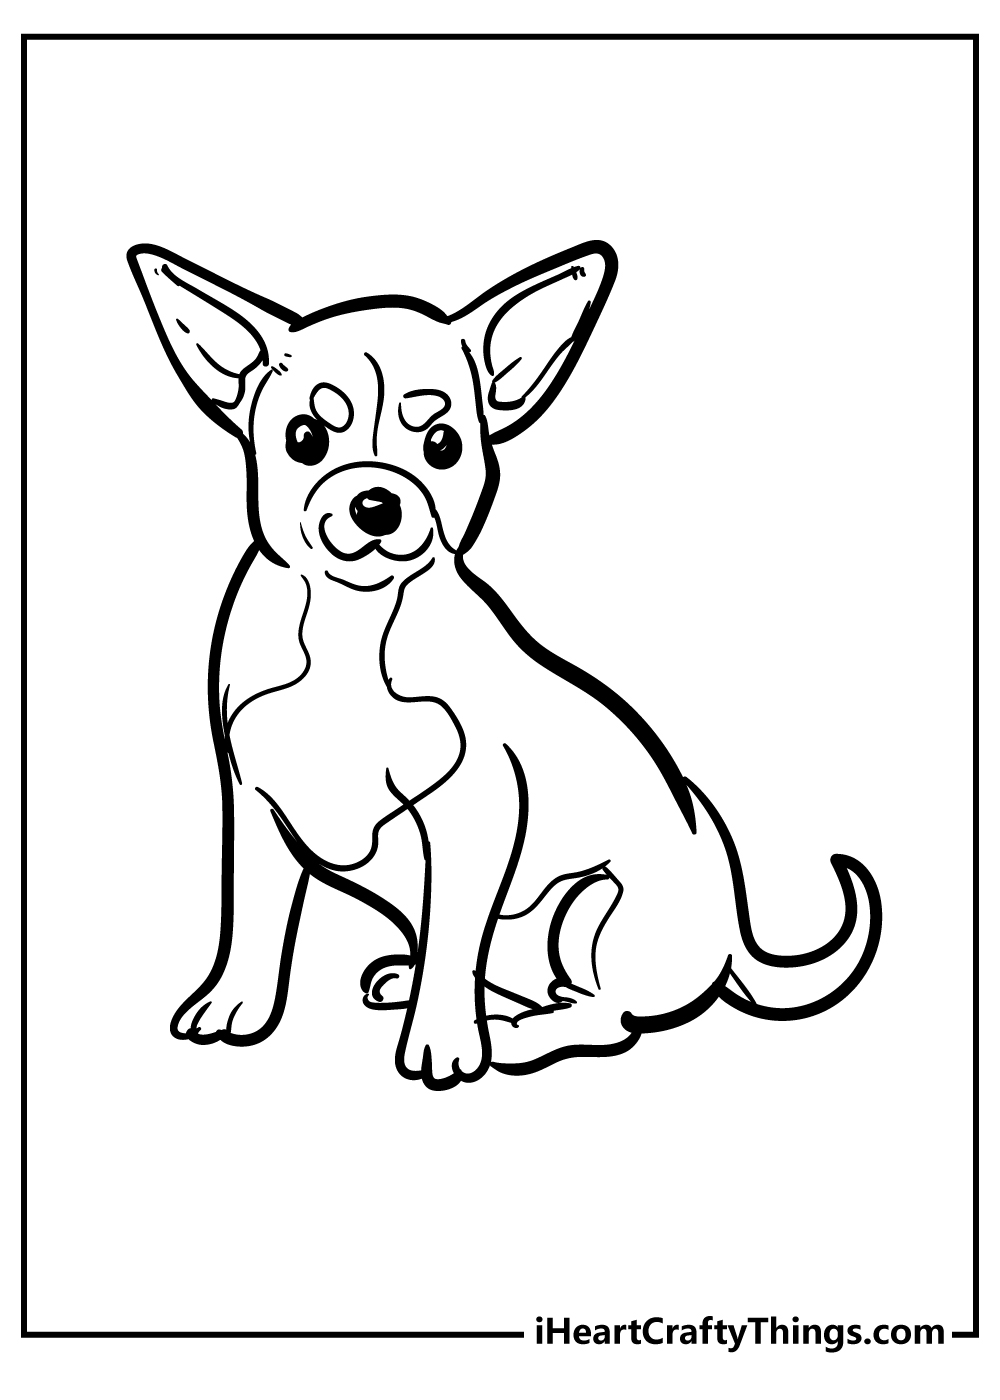 Chihuahua Easy Coloring Pages